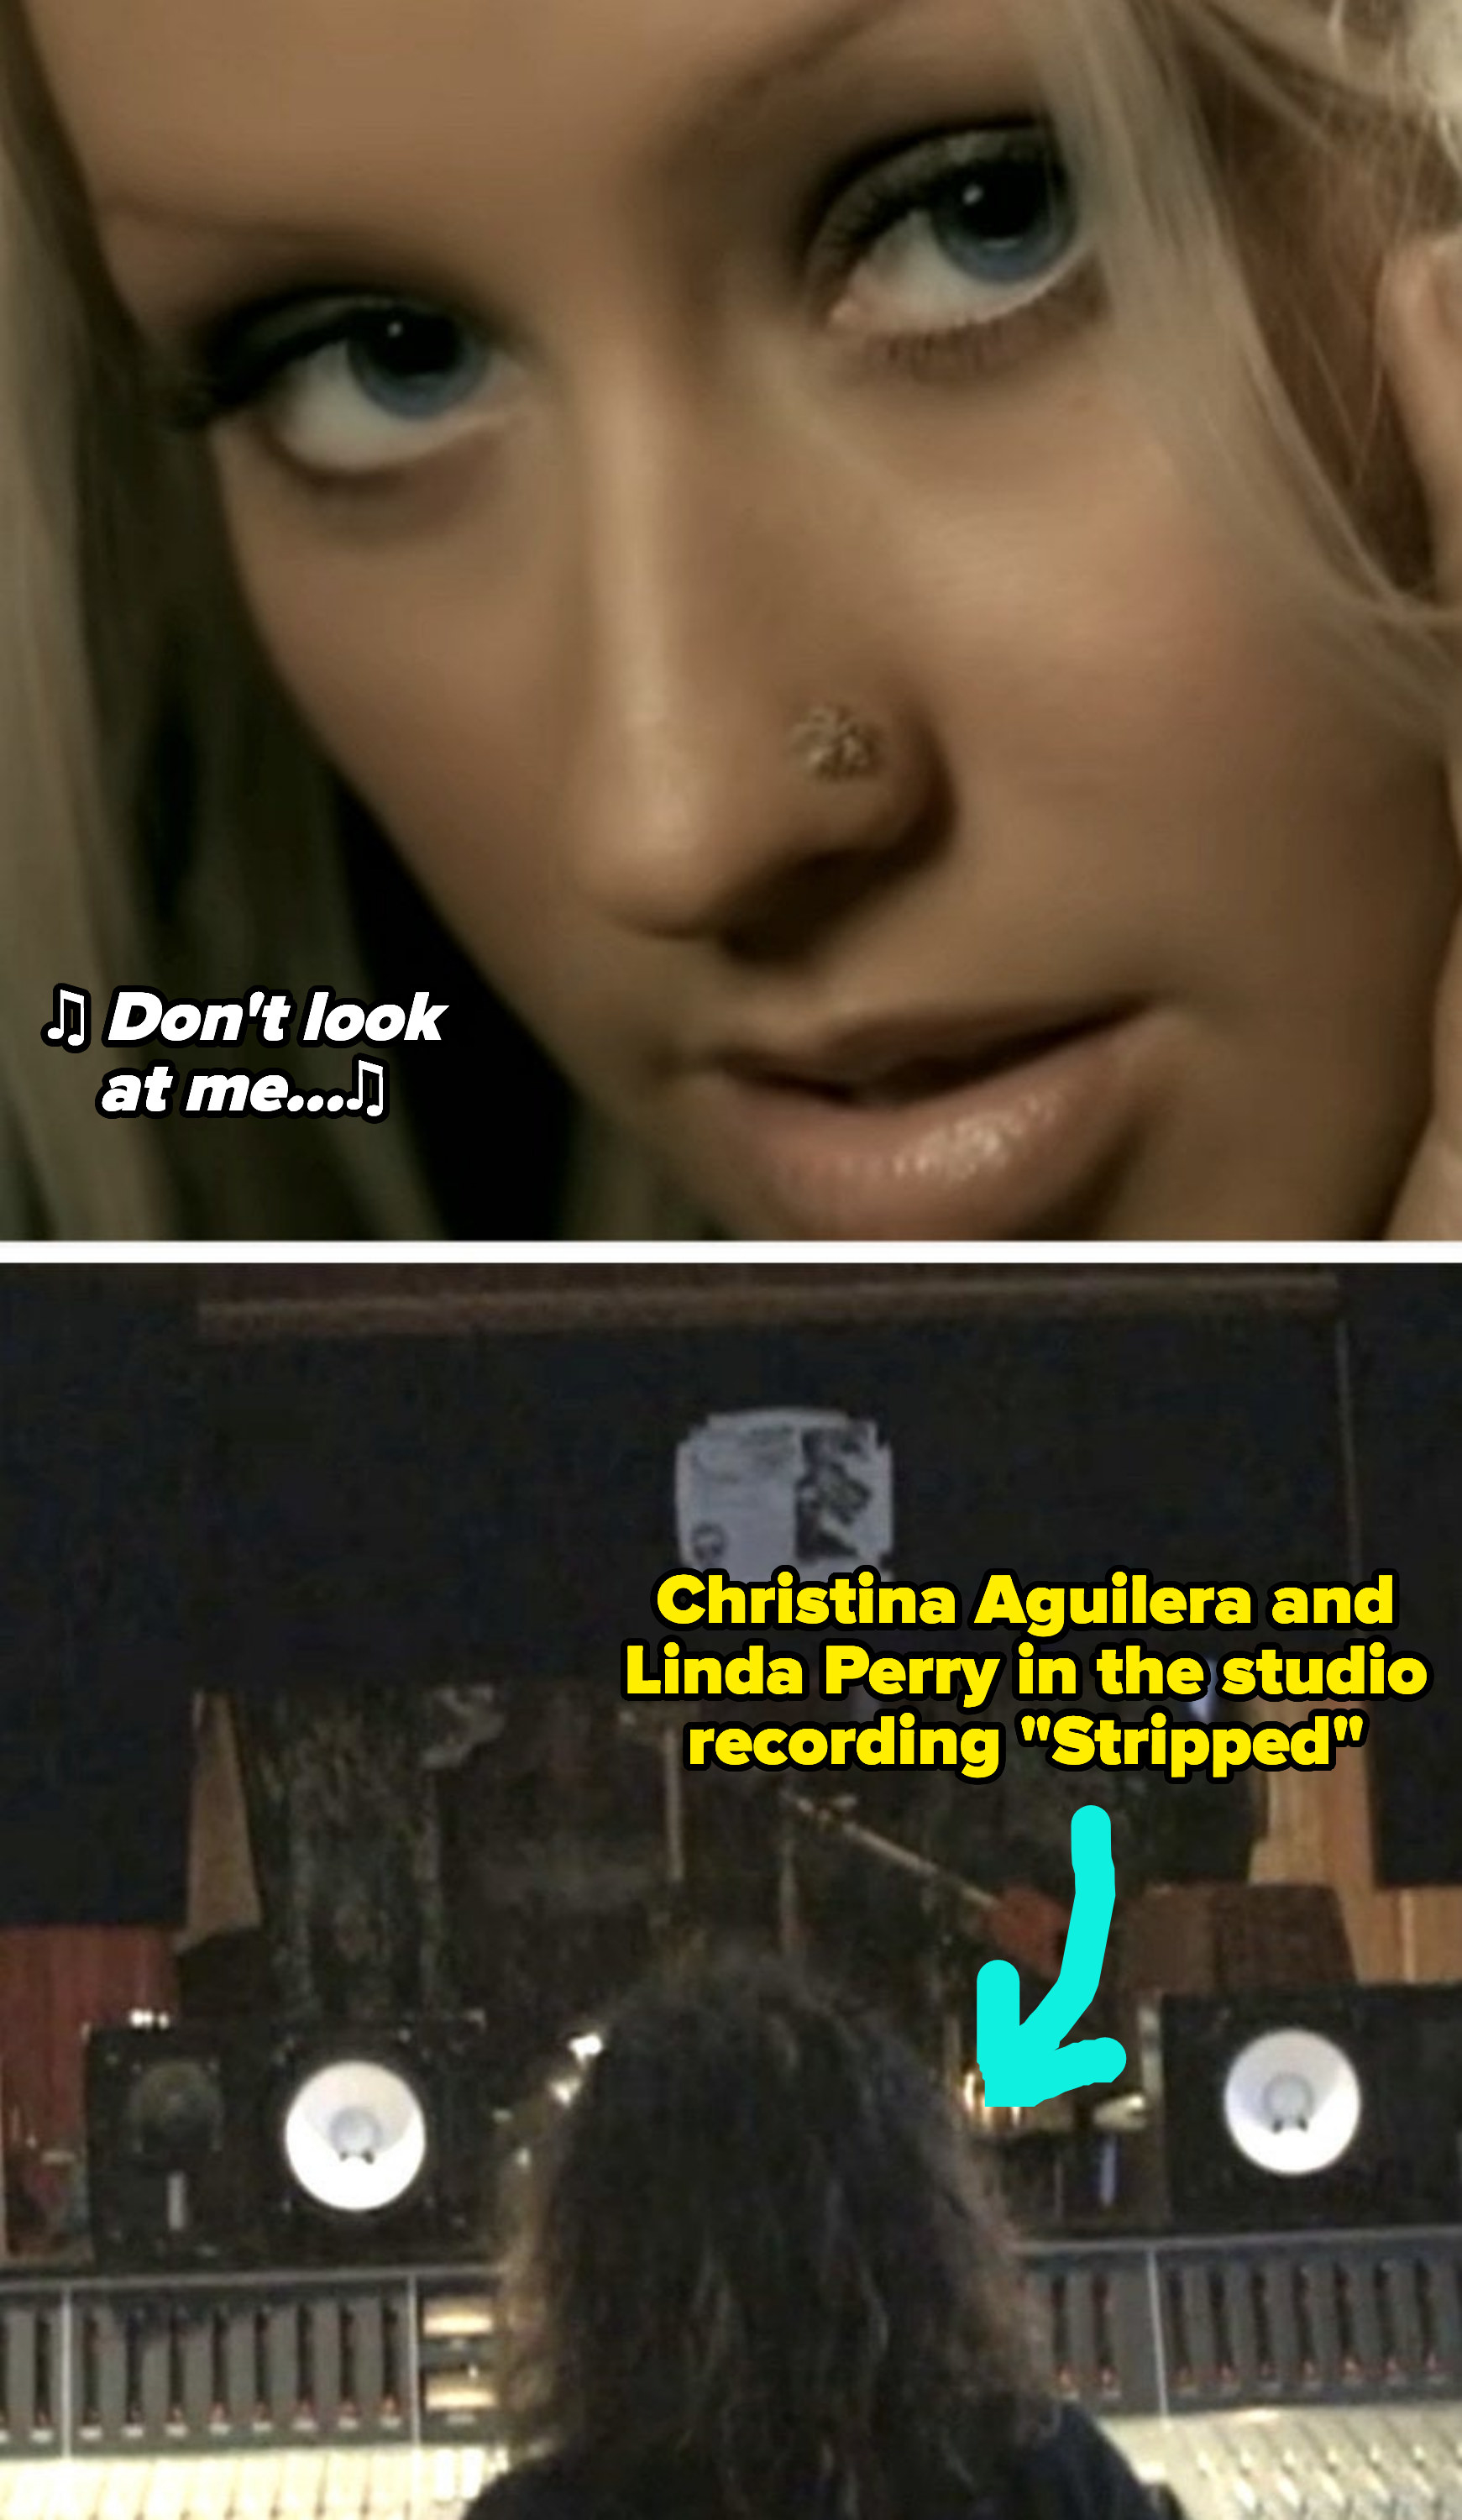 A photo of Aguilera in the music video juxtaposed with her and Linda Perry in the recording studio together